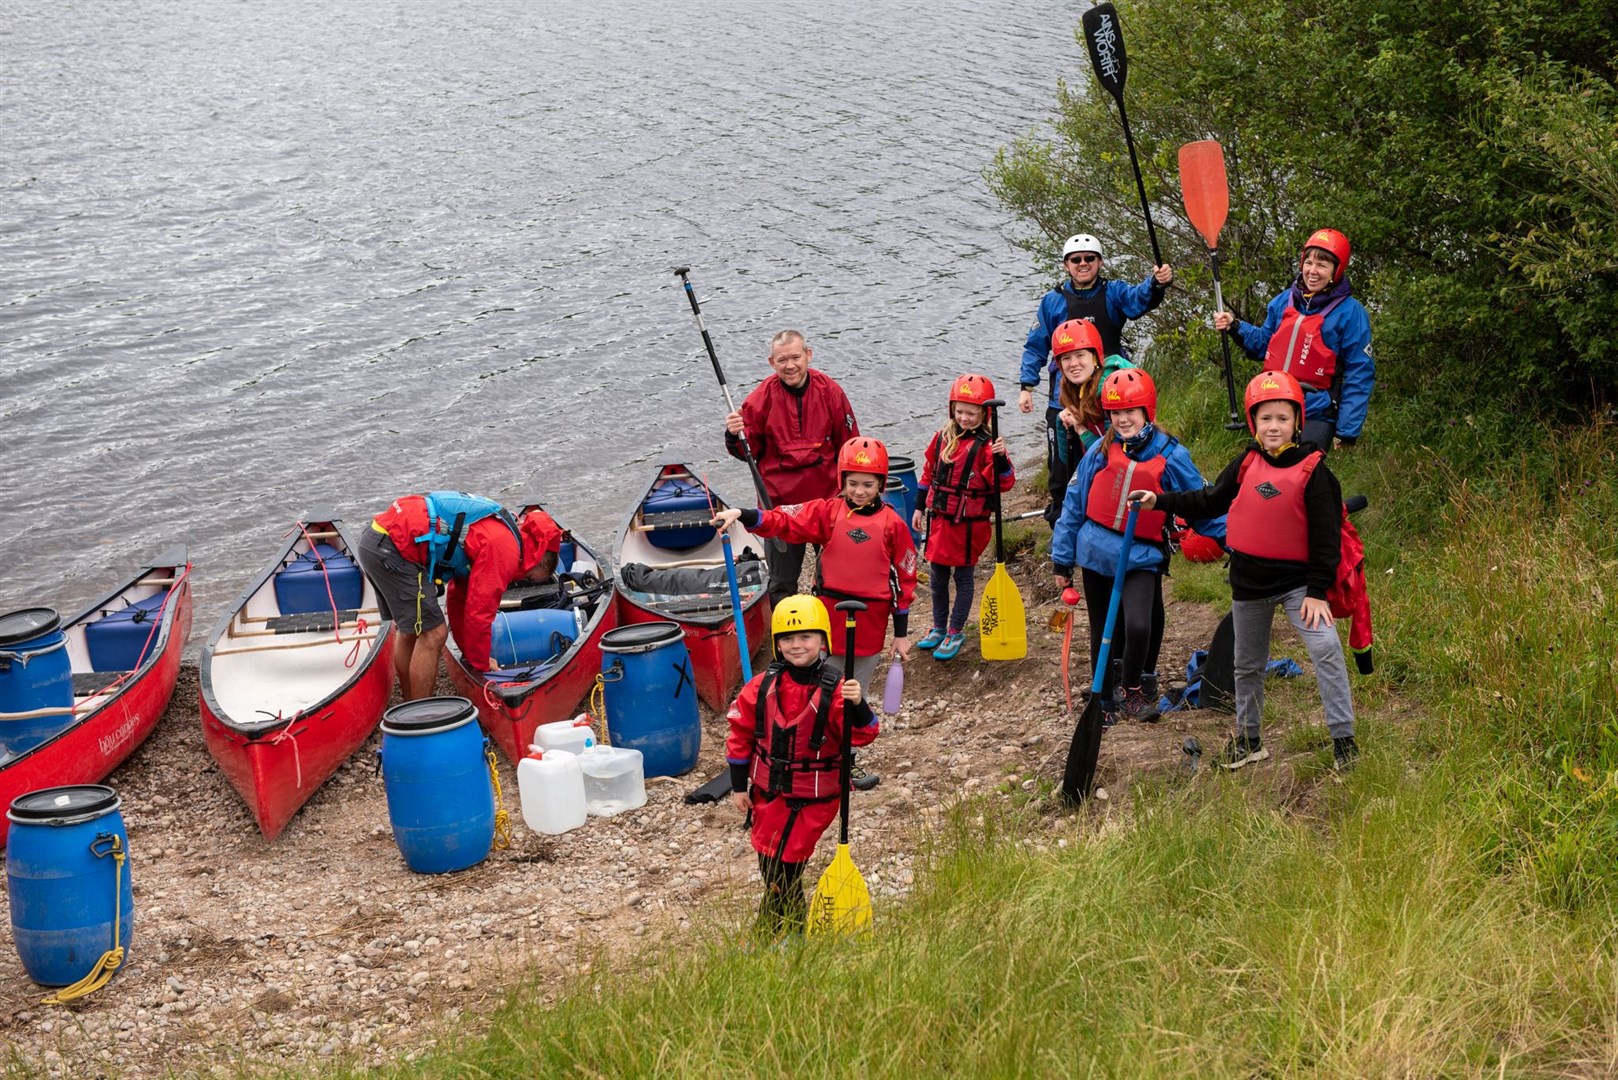 Having their kayak and eating it: one of the happy parties at Abernethy